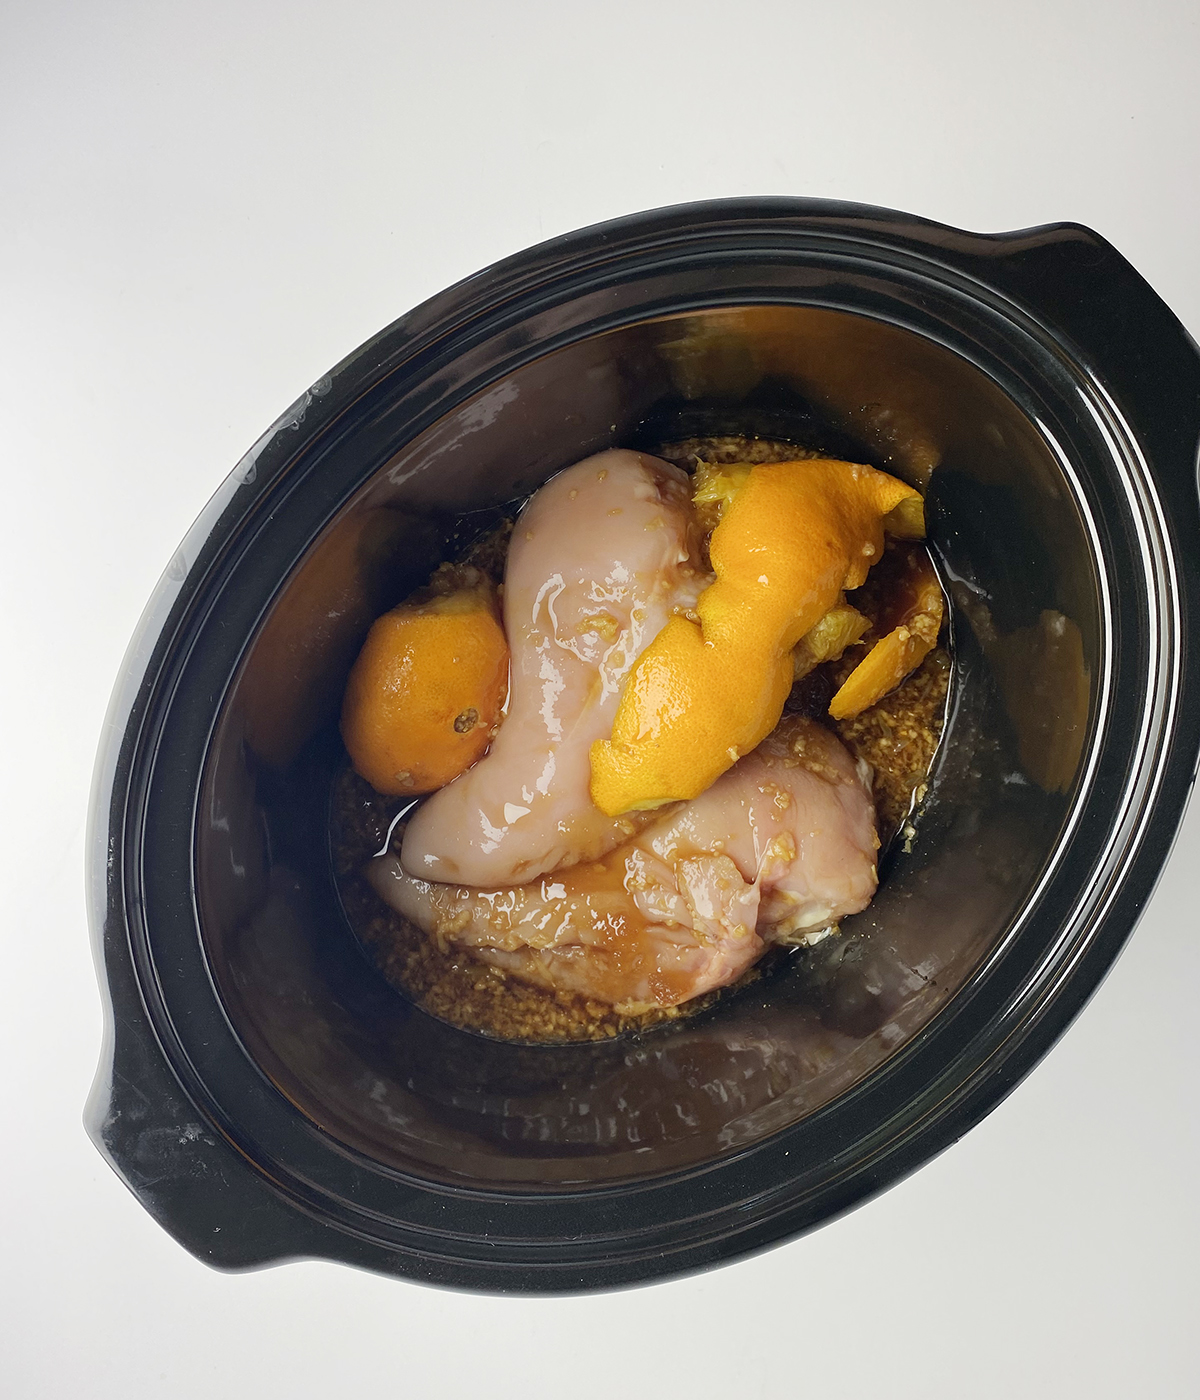 Sticky chicken ingredients in a slow cooker ready to be cooked.